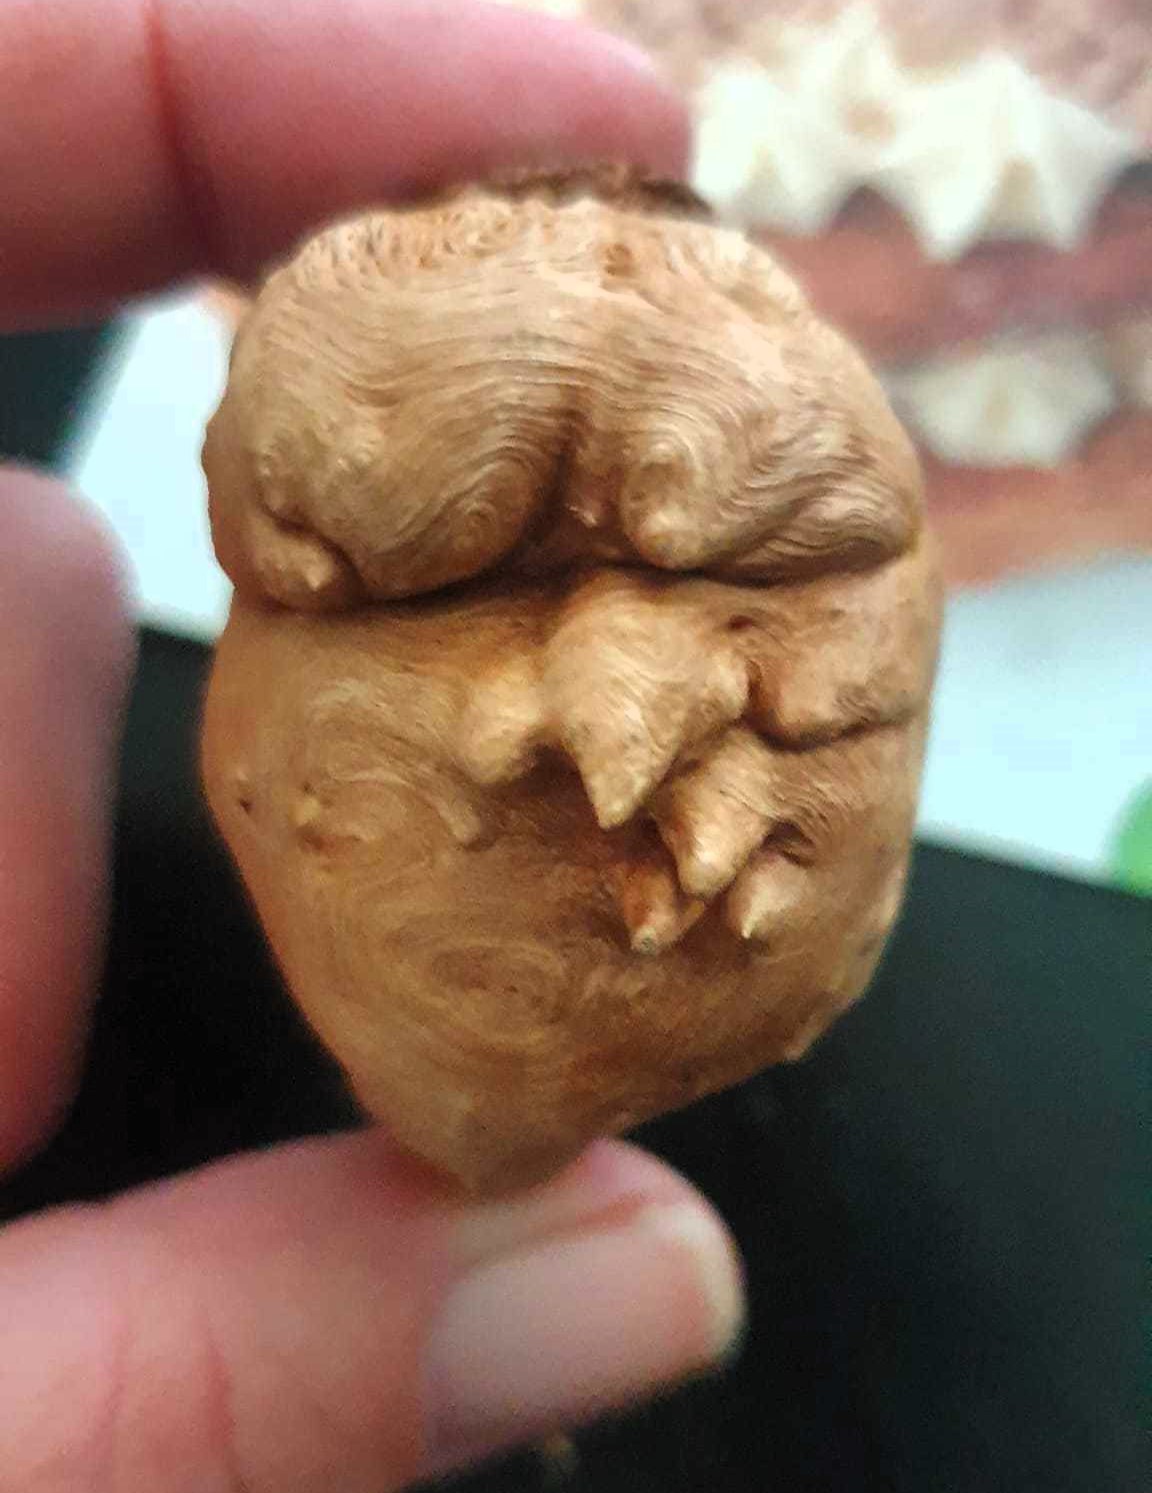 A Glasgow schoolgirl found tree bark resembling Donald Trump's face. The 10-year-old and her mum, Michelle Mcravey, agree it looks like the ex-US President.